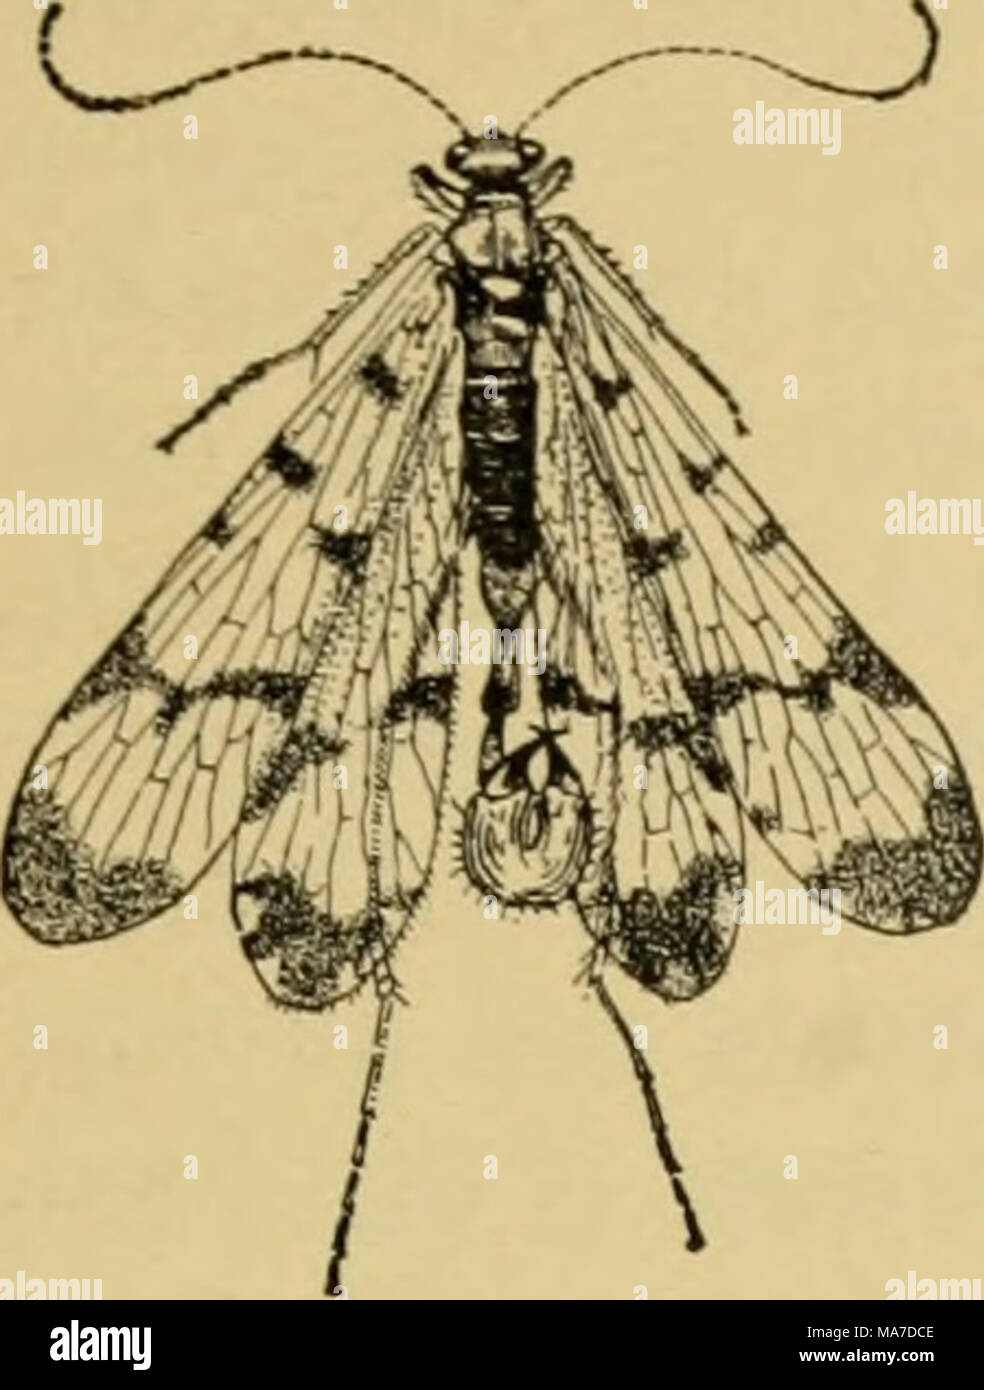 . Elementary entomology . Fig. ii8. A scorpion fly {Panorpa riifesce)is) (Twice natural size) (After Kellogg) gold, from which they are sometimes called golden-eyes. The larva: feed not only upon plant-lice, but upon any soft-bodied insects which they can overpower, or on soft insect eggs, and will not infrequently attack their own species. The adults seem fully aware of these canni- balistic tastes, for they lay the little white eggs on stalks about half an inch high, placing them out of the reach of the larvae. In the undisturbed dust beneath an old shed, or beneath cliffs, or along warm ban Stock Photo